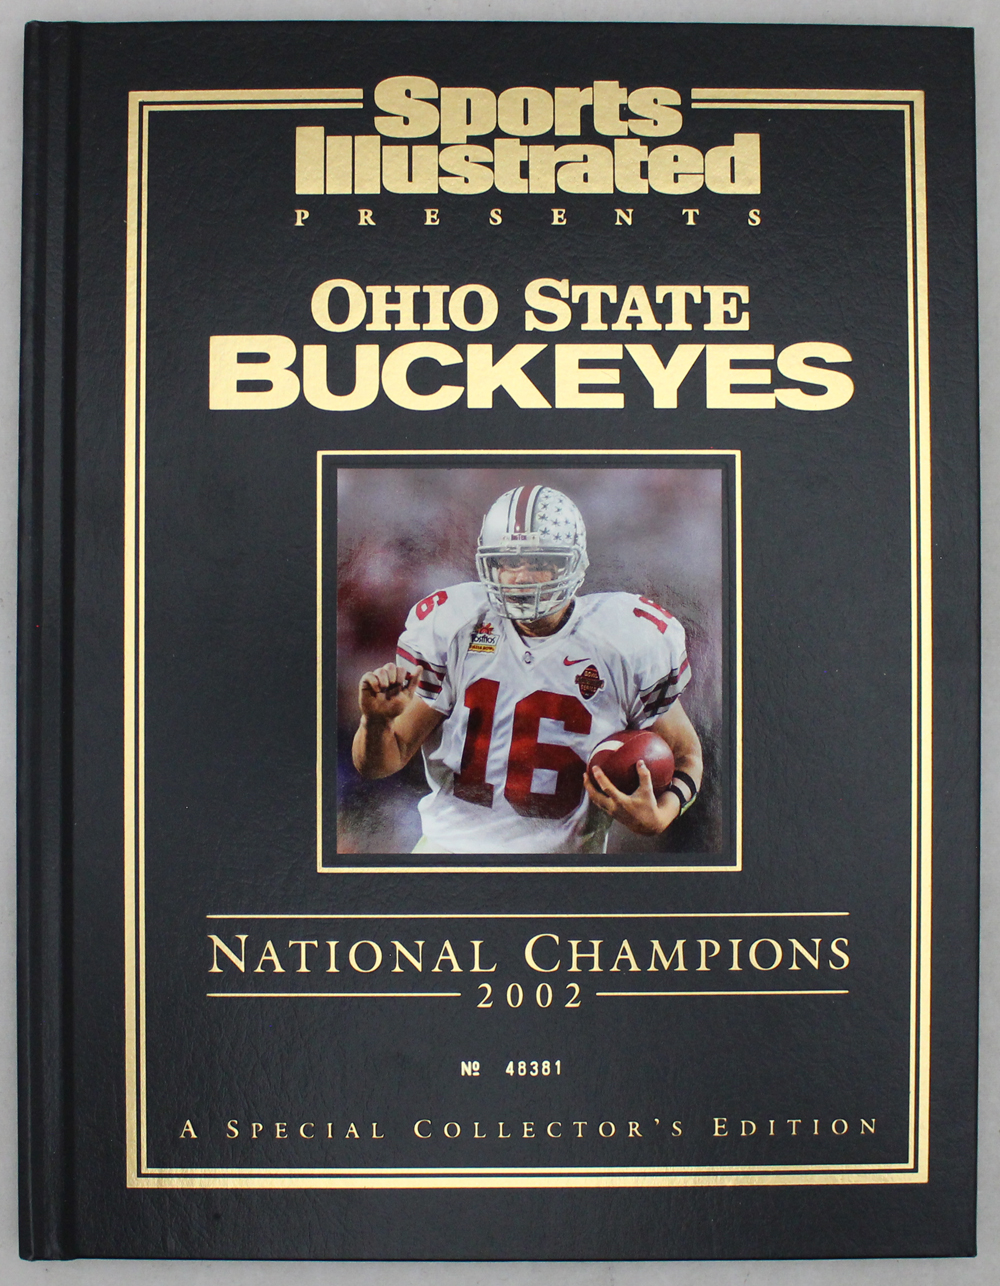 Ohio State Buckeyes 2002 National Champions Sports Illustrated Book